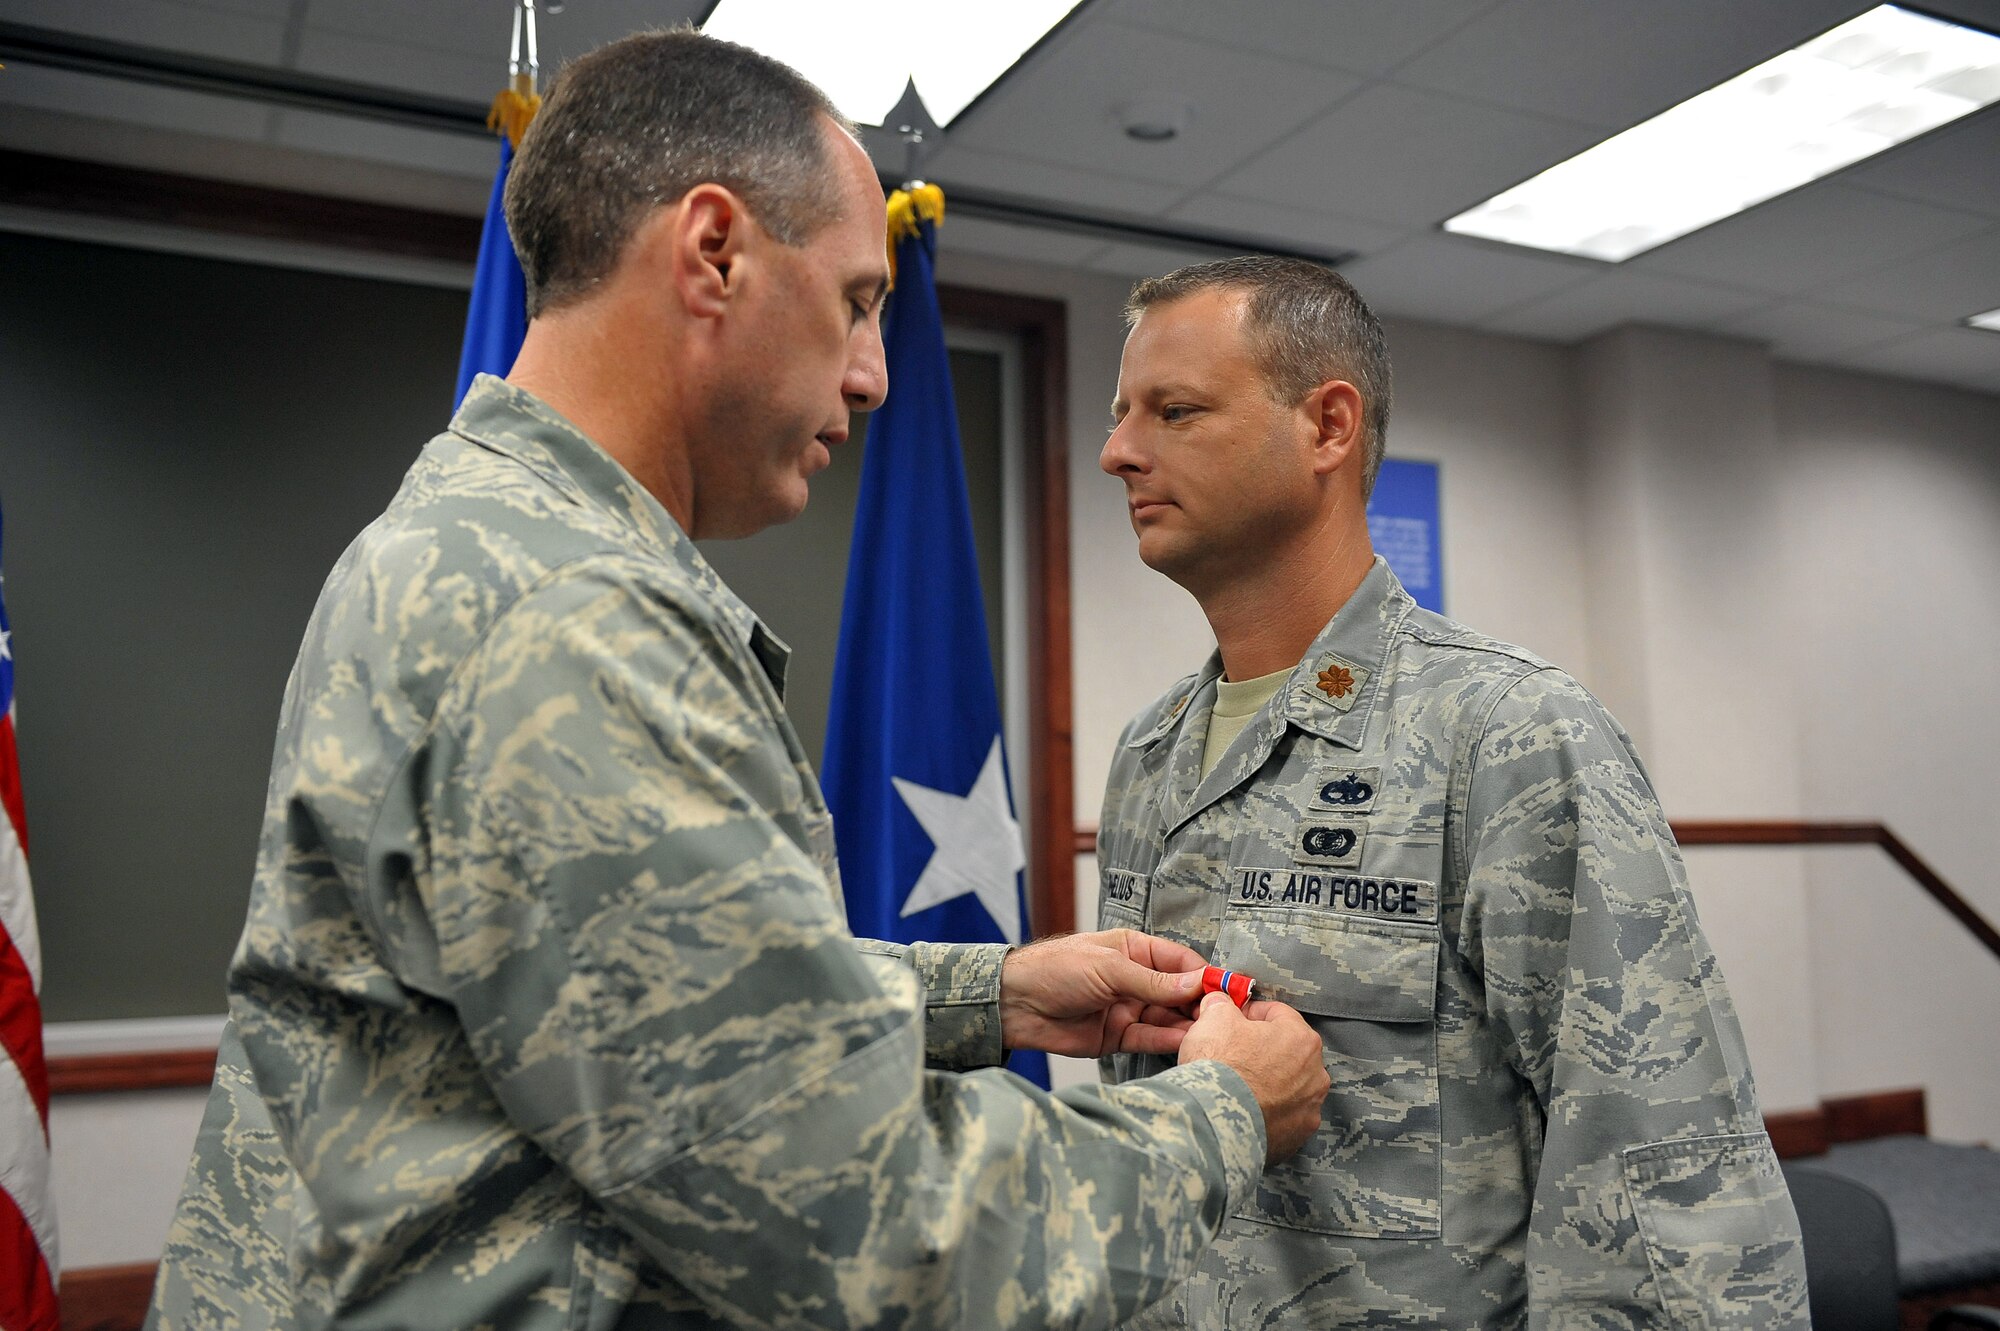 Maj. Wade Cornelius, right, and Brig. Gen. Lee Levy stand at attention at an award eremony where the major received the Bronze Star. U.S. Air Force photo by Tommie Horton.